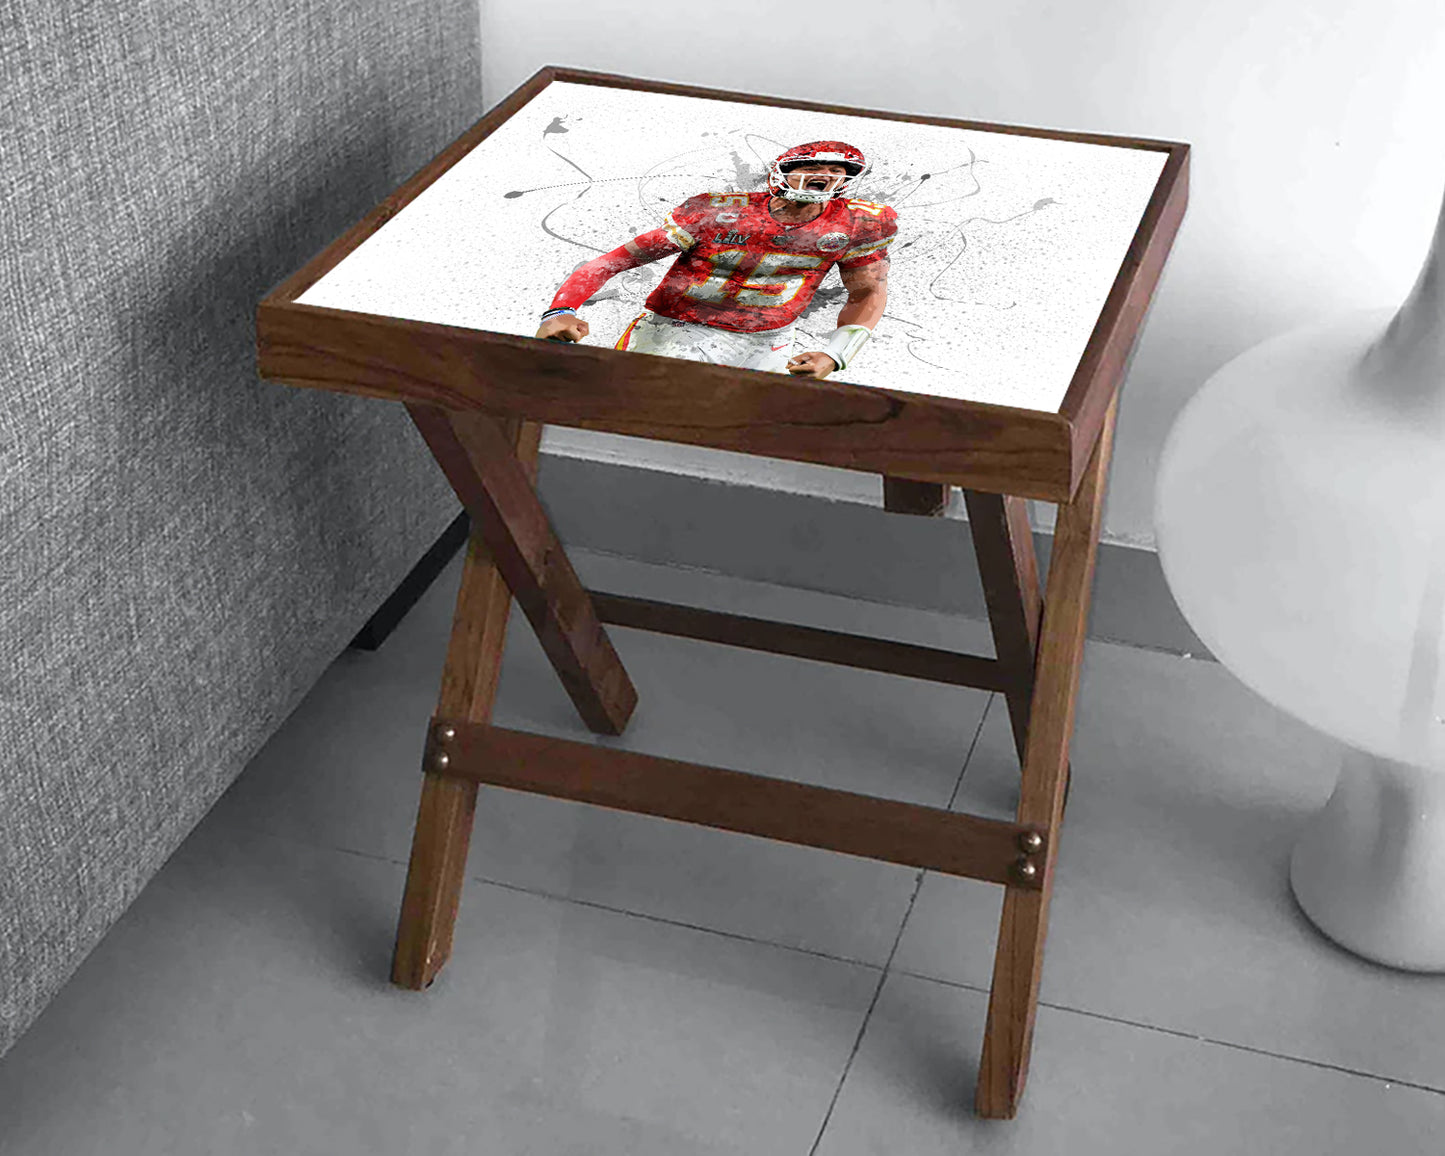 Patrick Mahomes Splash Effect Coffee and Laptop Table 